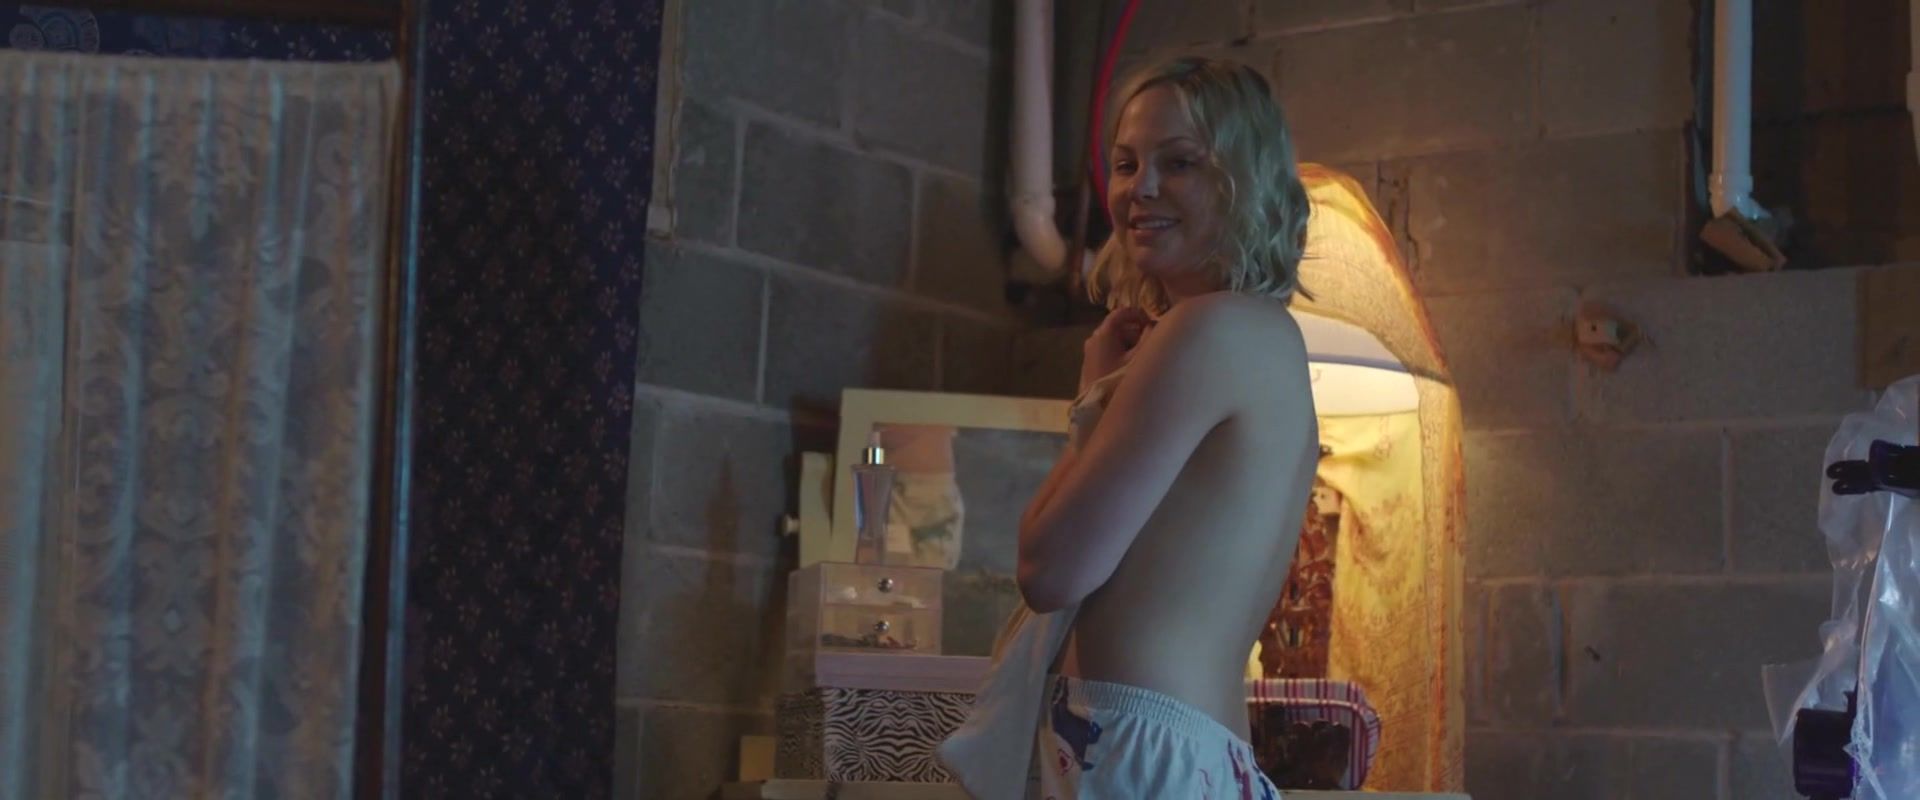 Pure18 Naked Deborah Ann Woll, Adelaide Clemens, Catherine Carlen, Vienna Stampeen nude - The Automatic Hate (2016) Eva Angelina